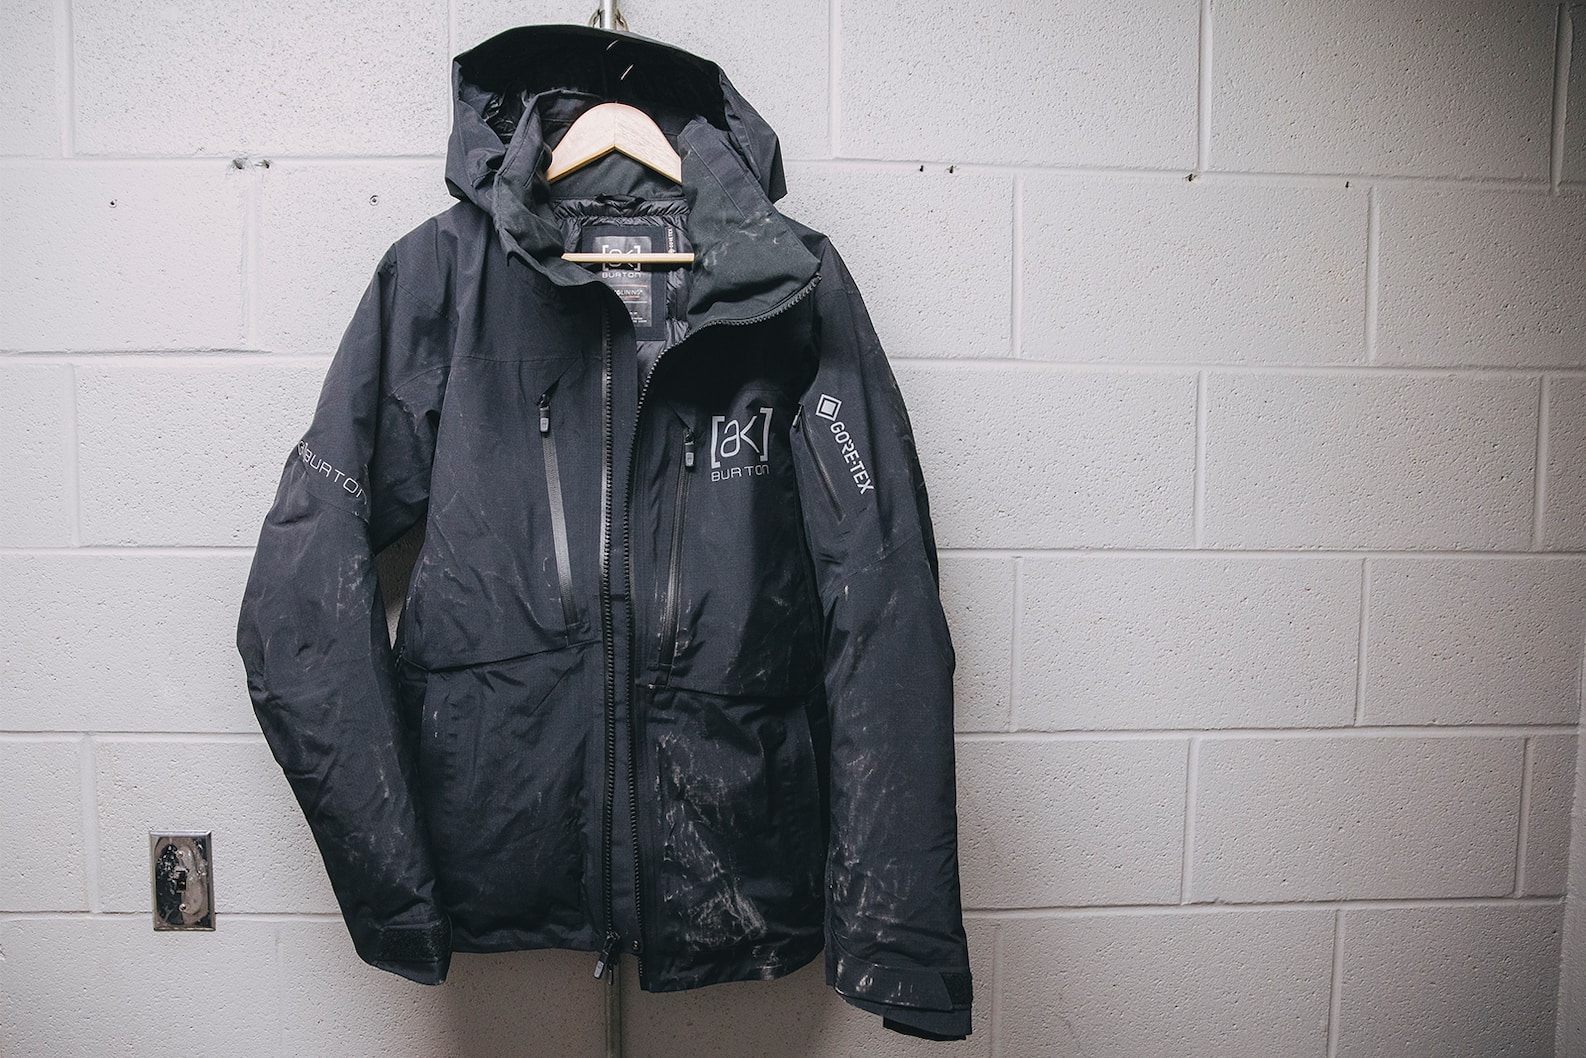 How to Wash a Puffer Jacket in 4 Easy Steps